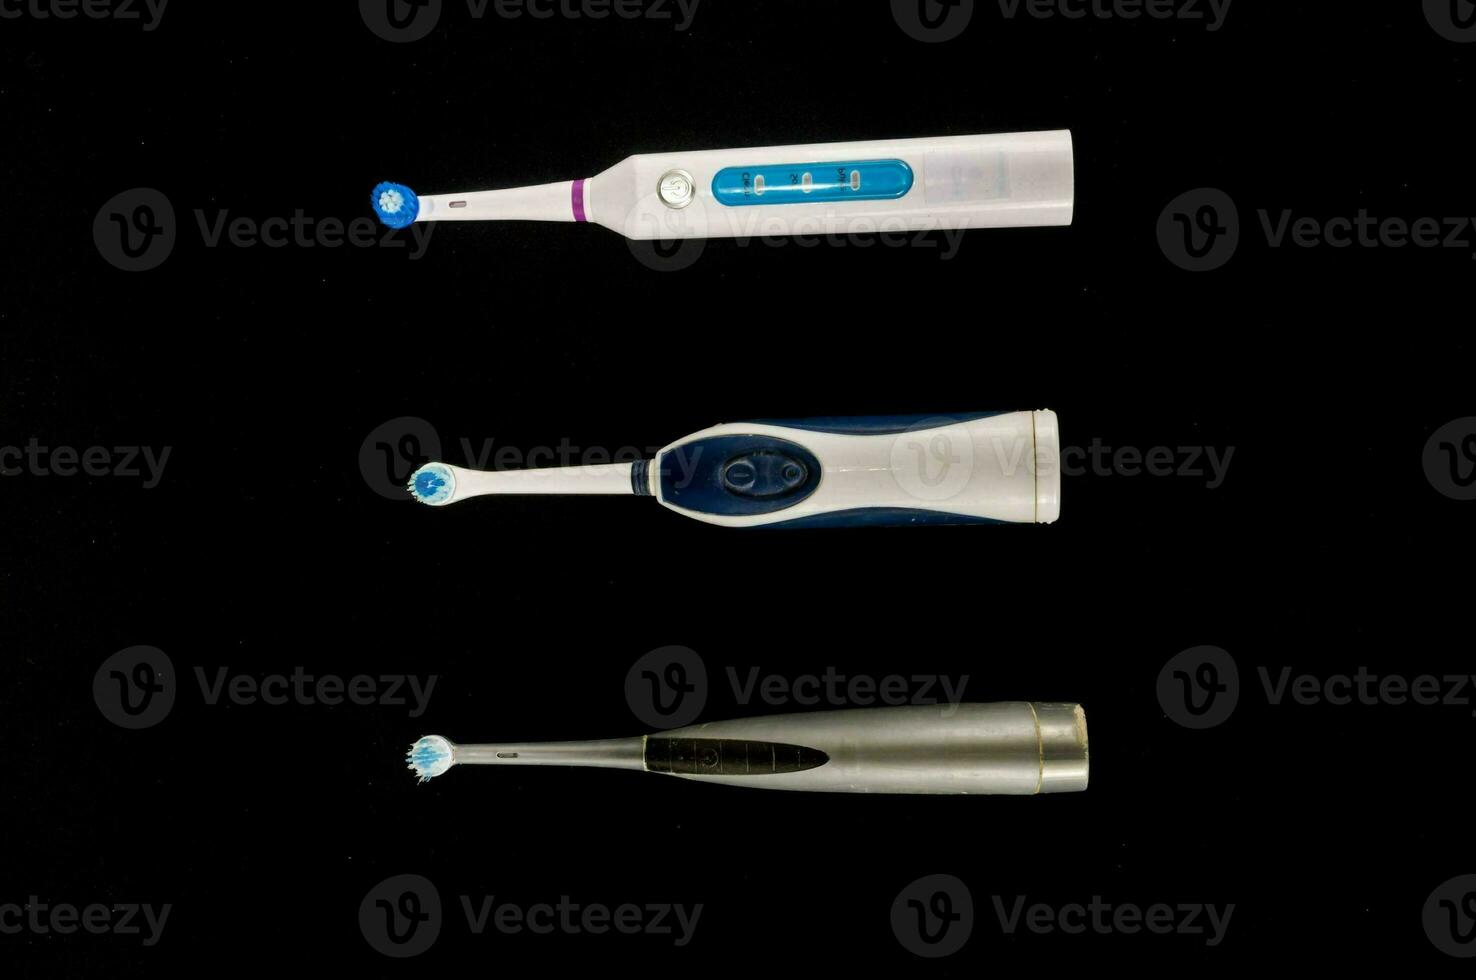 three different types of electric toothbrushes are shown photo